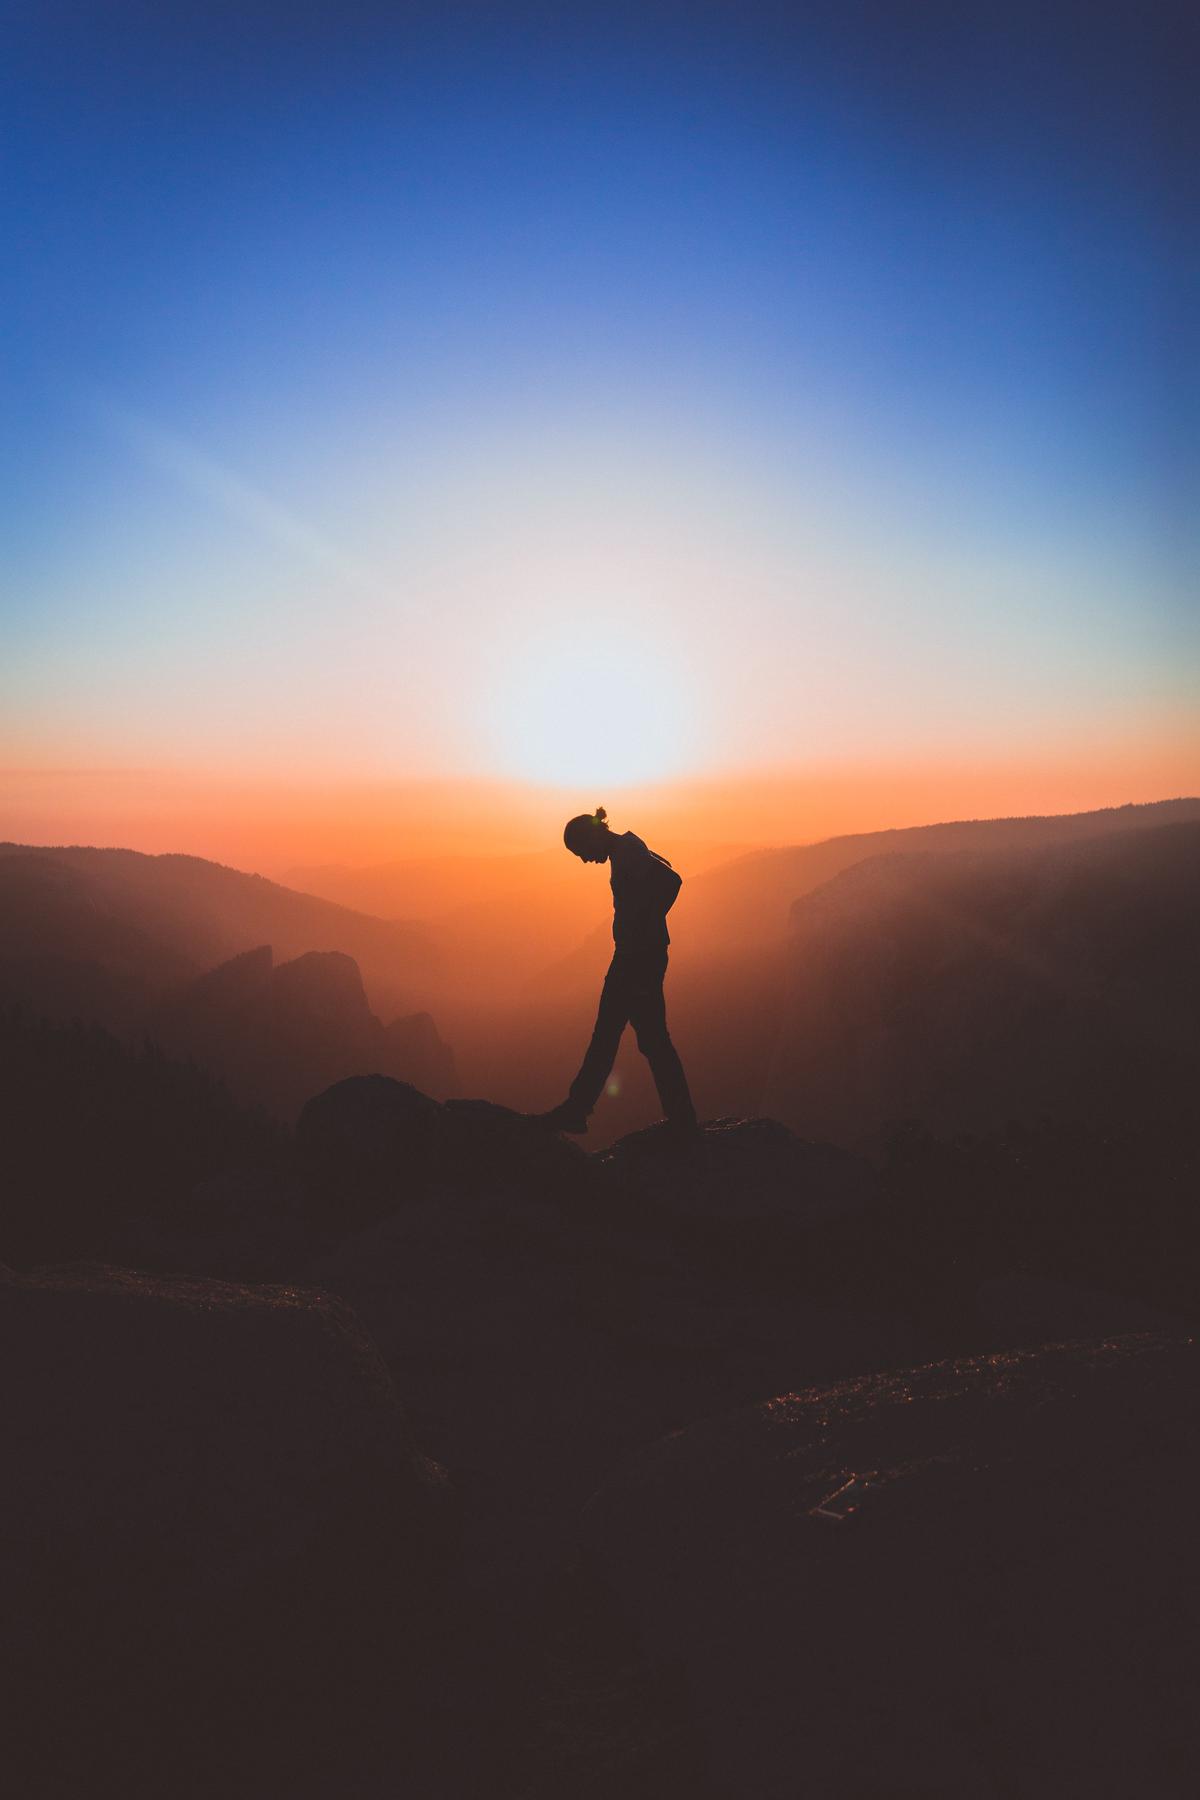 A person standing on a mountain top looking at the horizon, representing finding one's life purpose and reaching new heights.